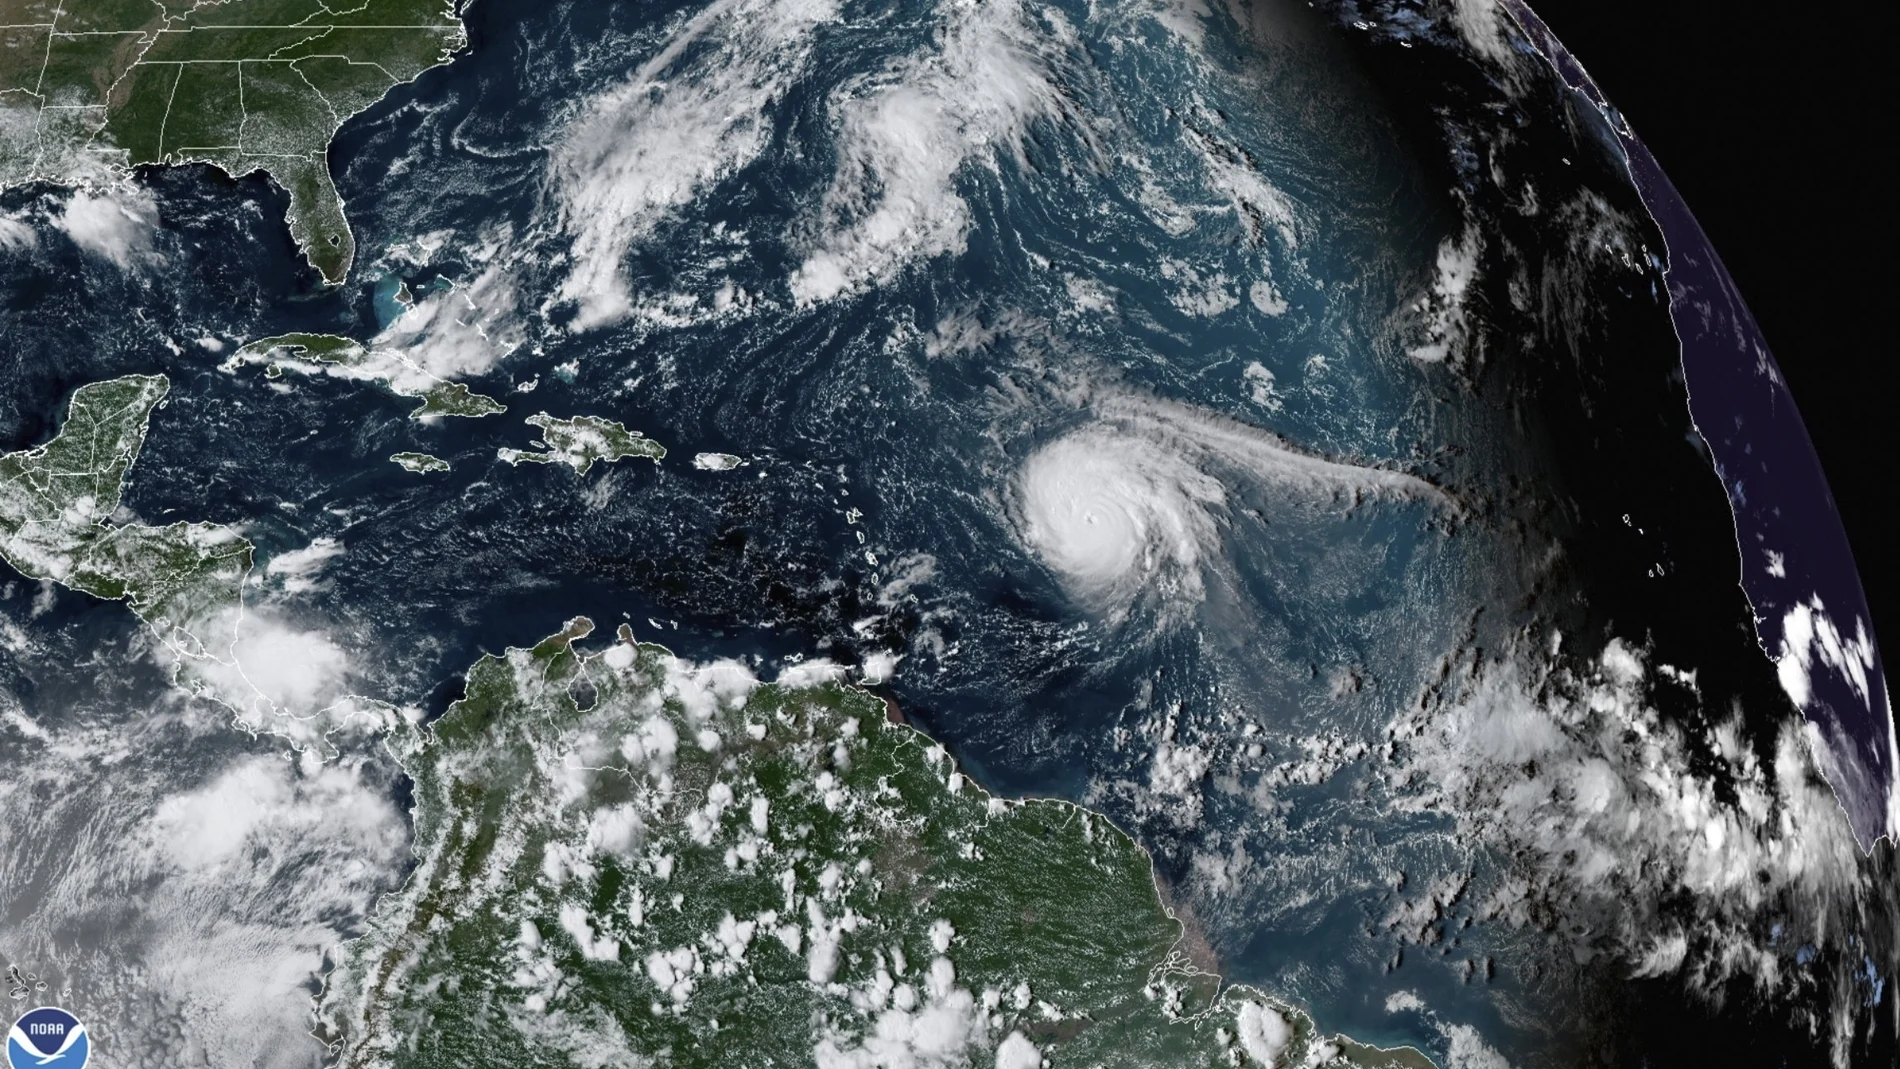 This satellite image provided by the National Oceanic and Atmospheric Administration shows Hurricane Sam, just right of center, in the Atlantic Ocean, Monday, Sept. 27, 2021, at 1920 Zulu (3:20 p.m. ET). Sam is a powerful Category 4 storm but it poses no threat to land as it loops northward in the Atlantic, according to the U.S. National Hurricane Center. (NOAA via AP)